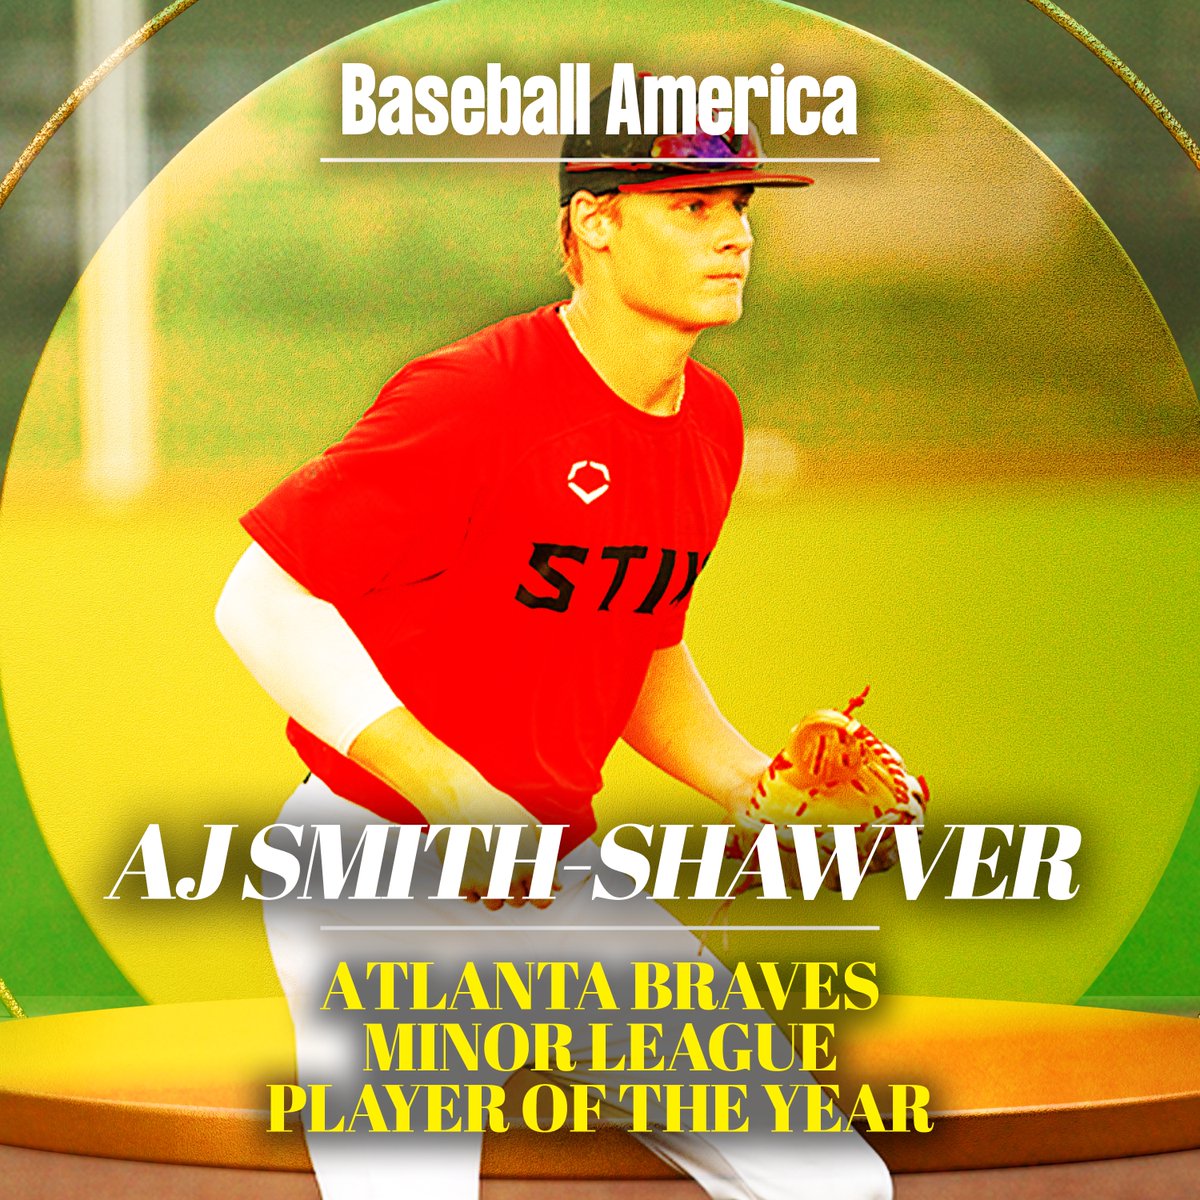 . @Braves 2023 Minor League Player Of The Year: A.J. Smith-Shawver baseballamerica.com/stories/a-j-sm…